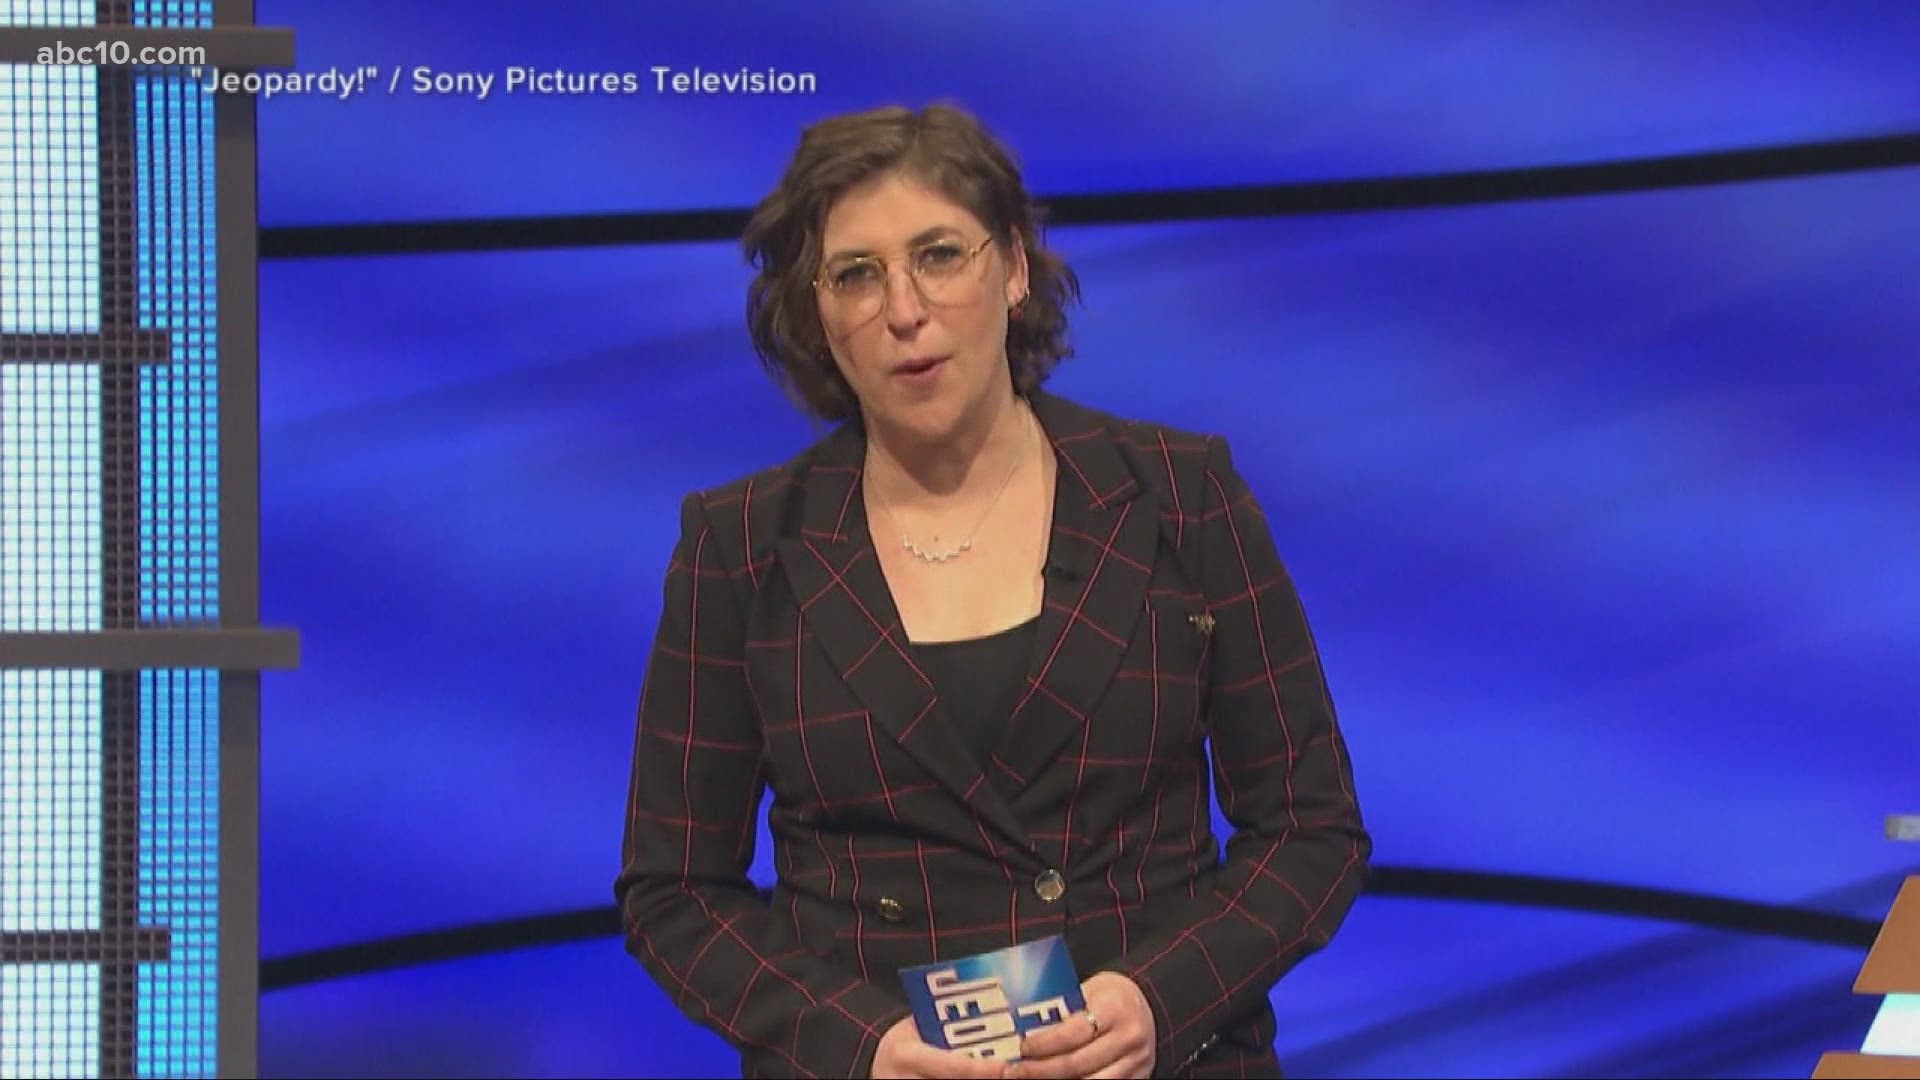 The Big Bang Theory actress Mayim Bialik is also a neuroscientist, and the announcement she would guest host Jeopardy! came as a surprise even to her.